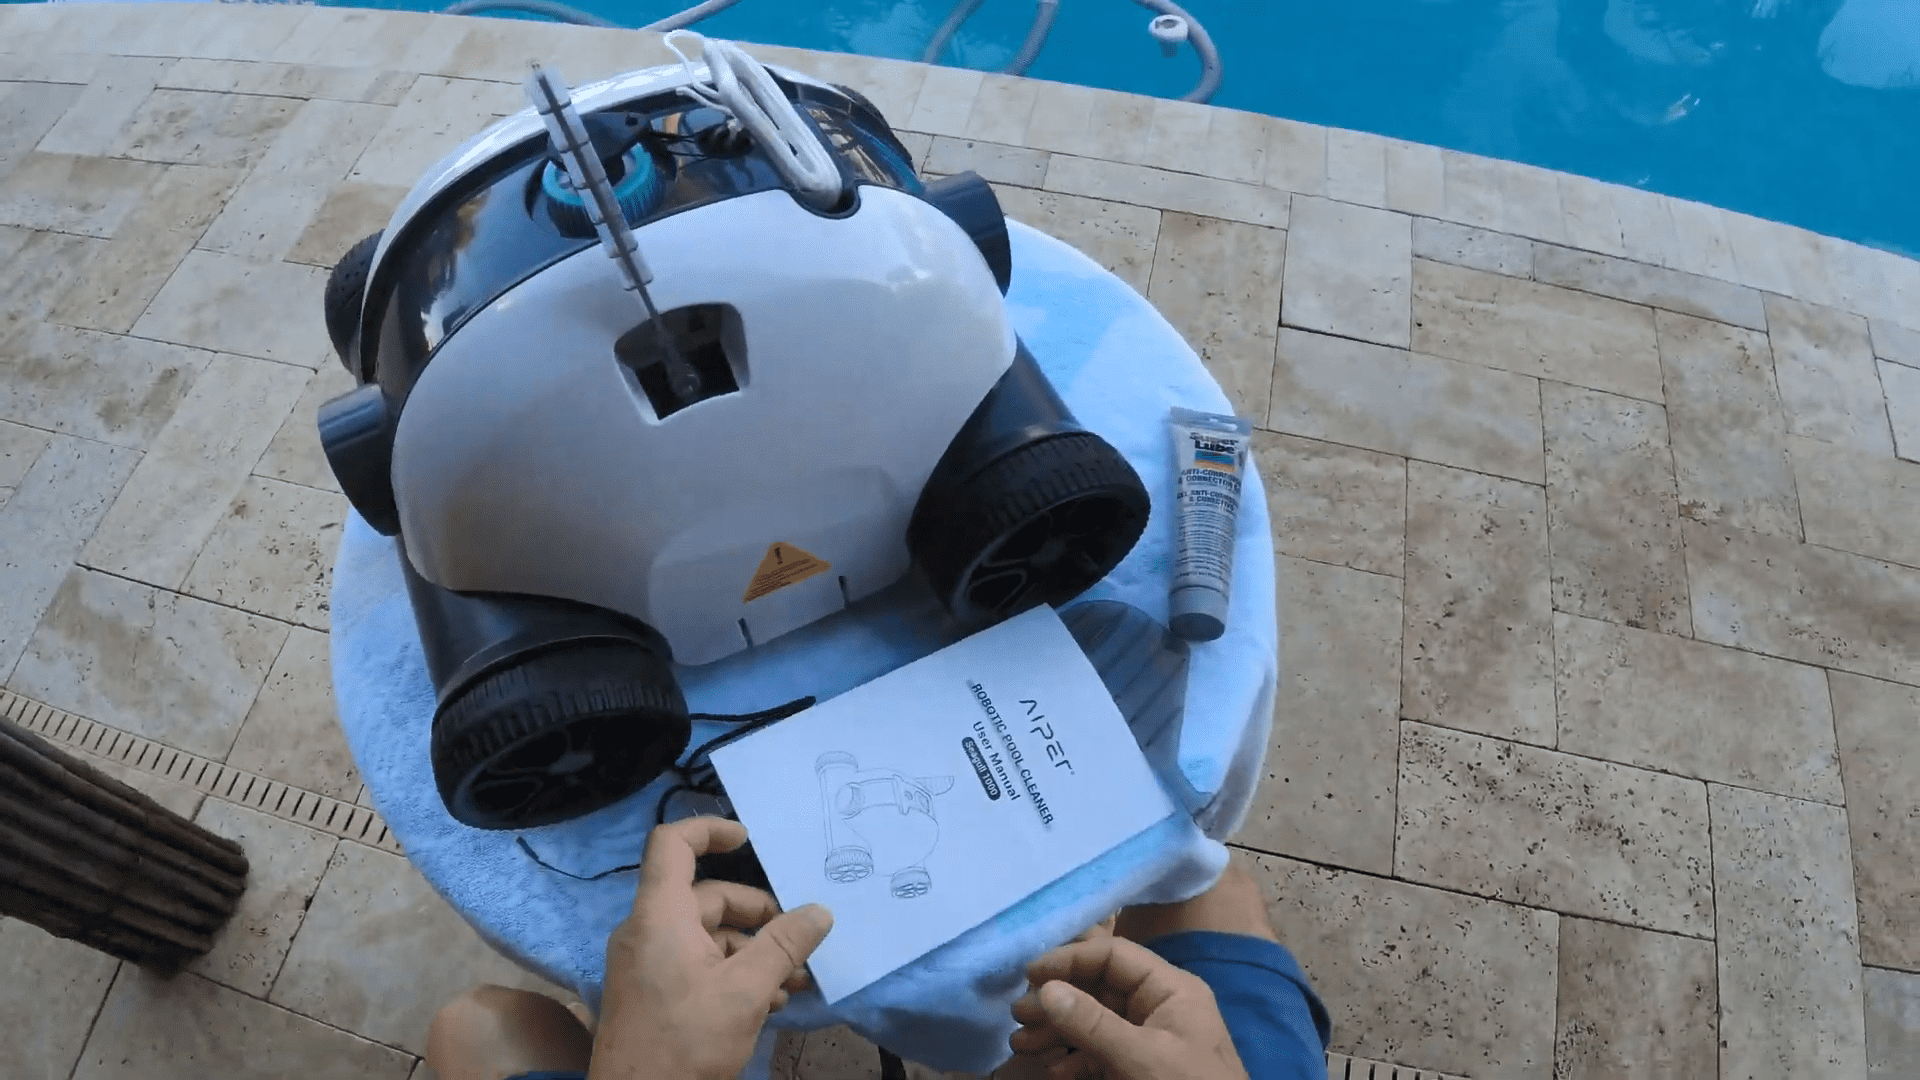 About Seagull 1000 Cordless Robotic Pool Cleaner